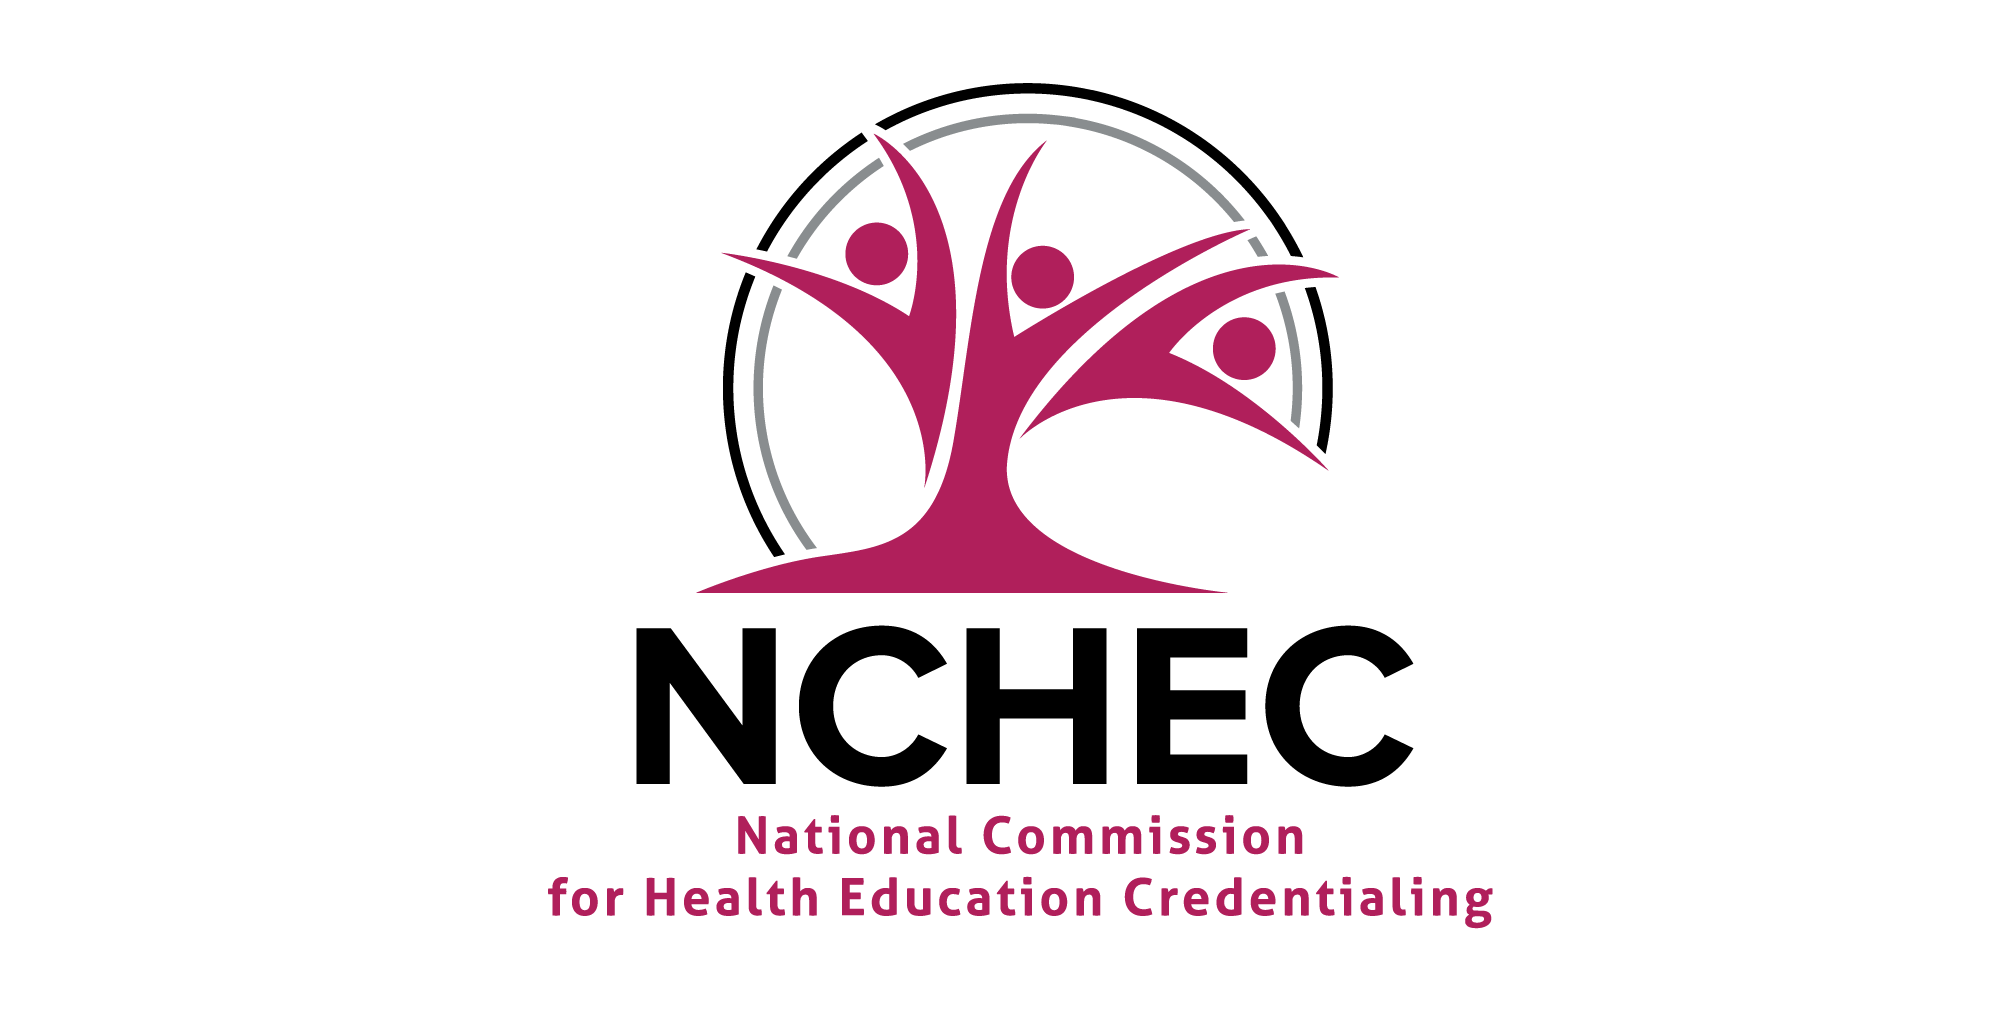 Red and black NCHEC logo